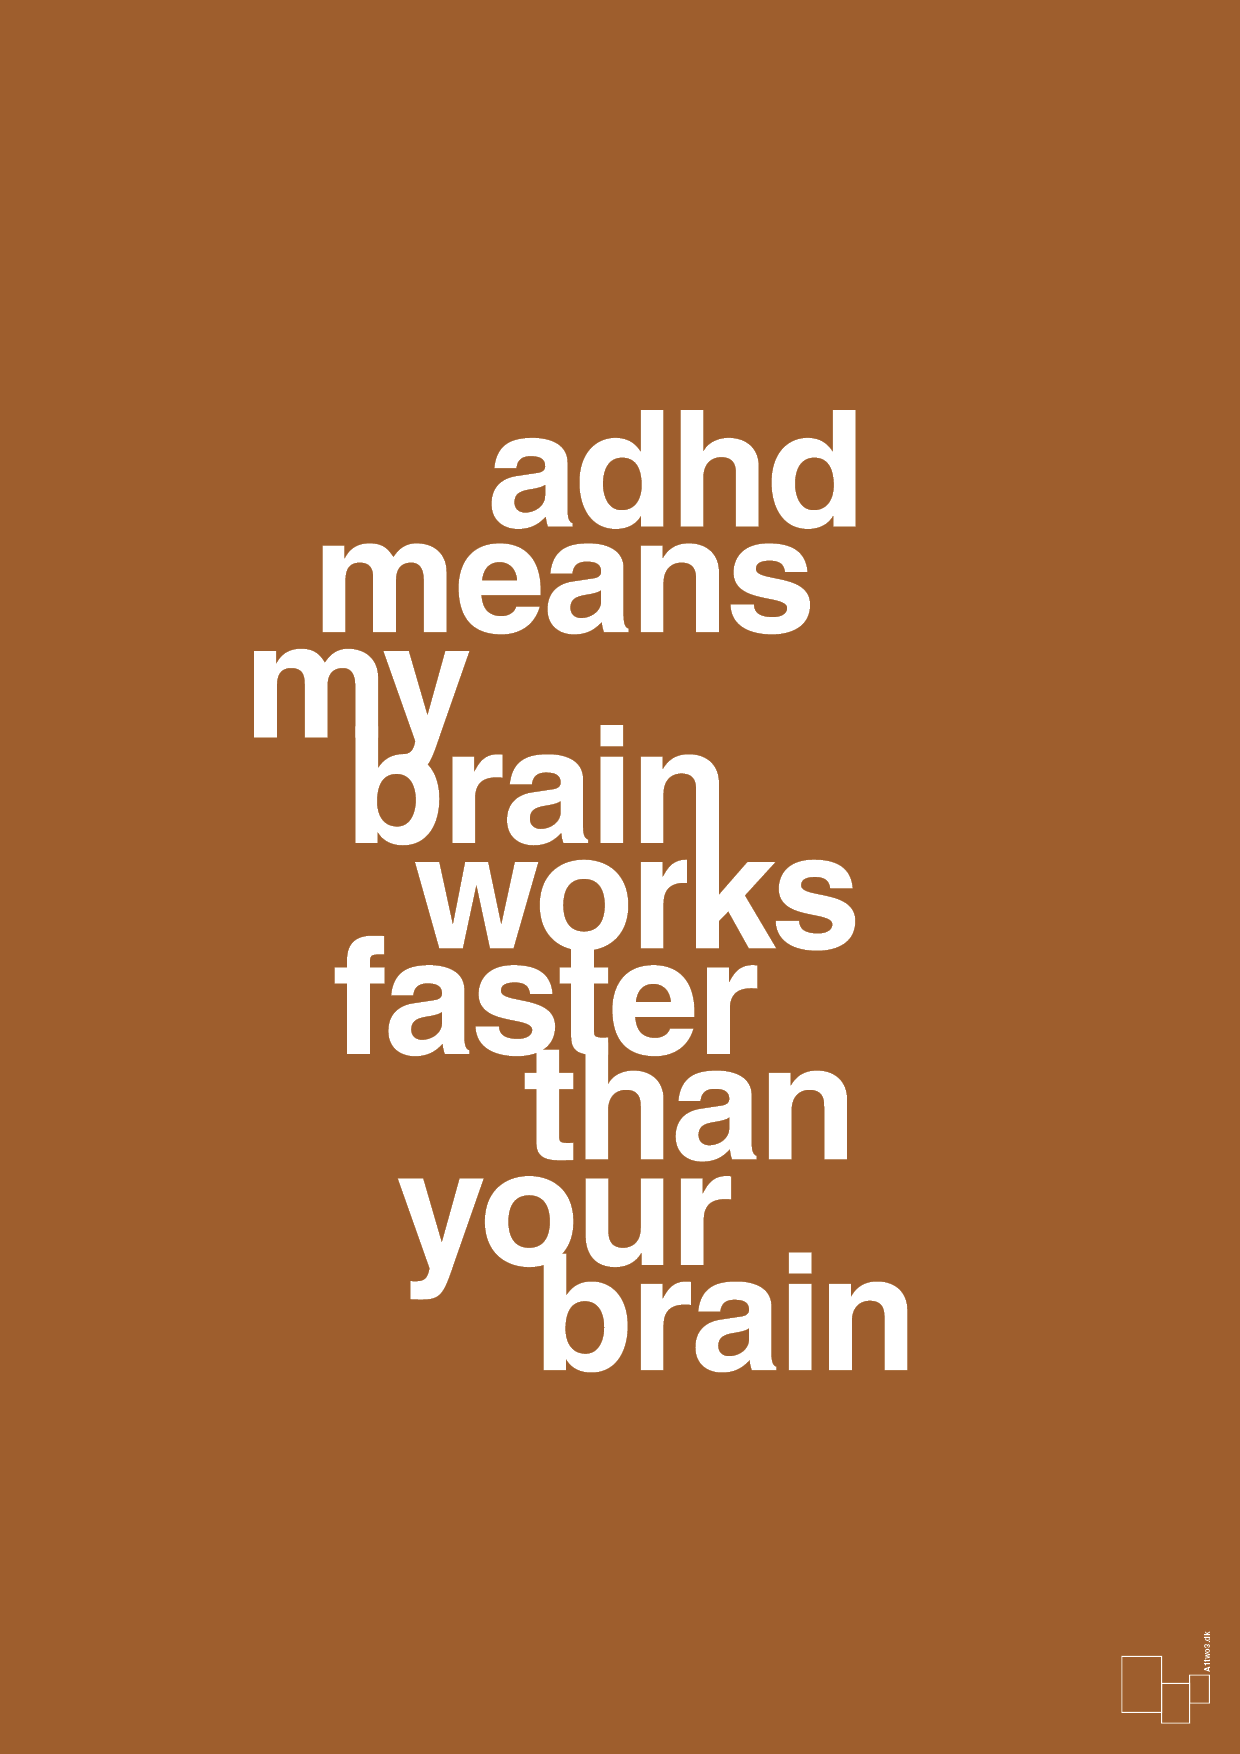 adhd means my brain works faster than your brain - Plakat med Samfund i Cognac